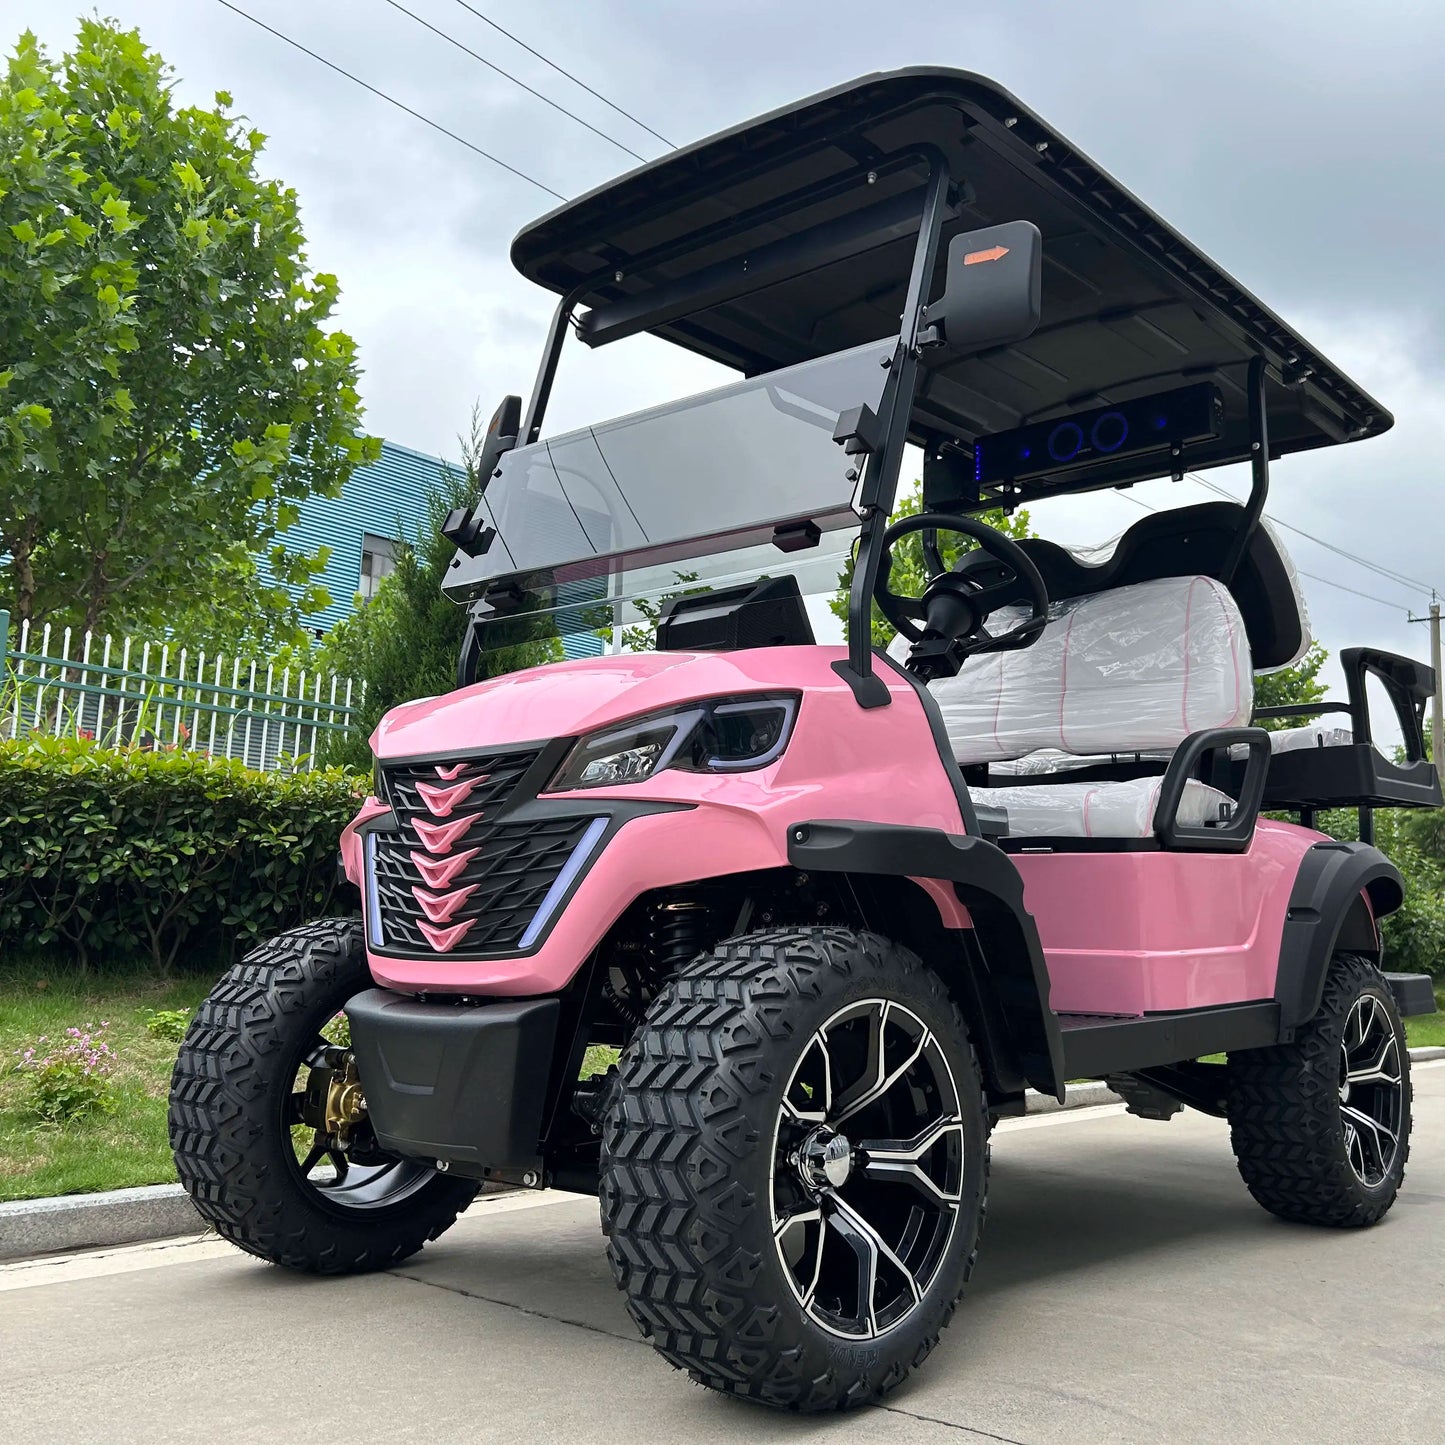 4 Wheel Off Road Electric Hunting Buggy